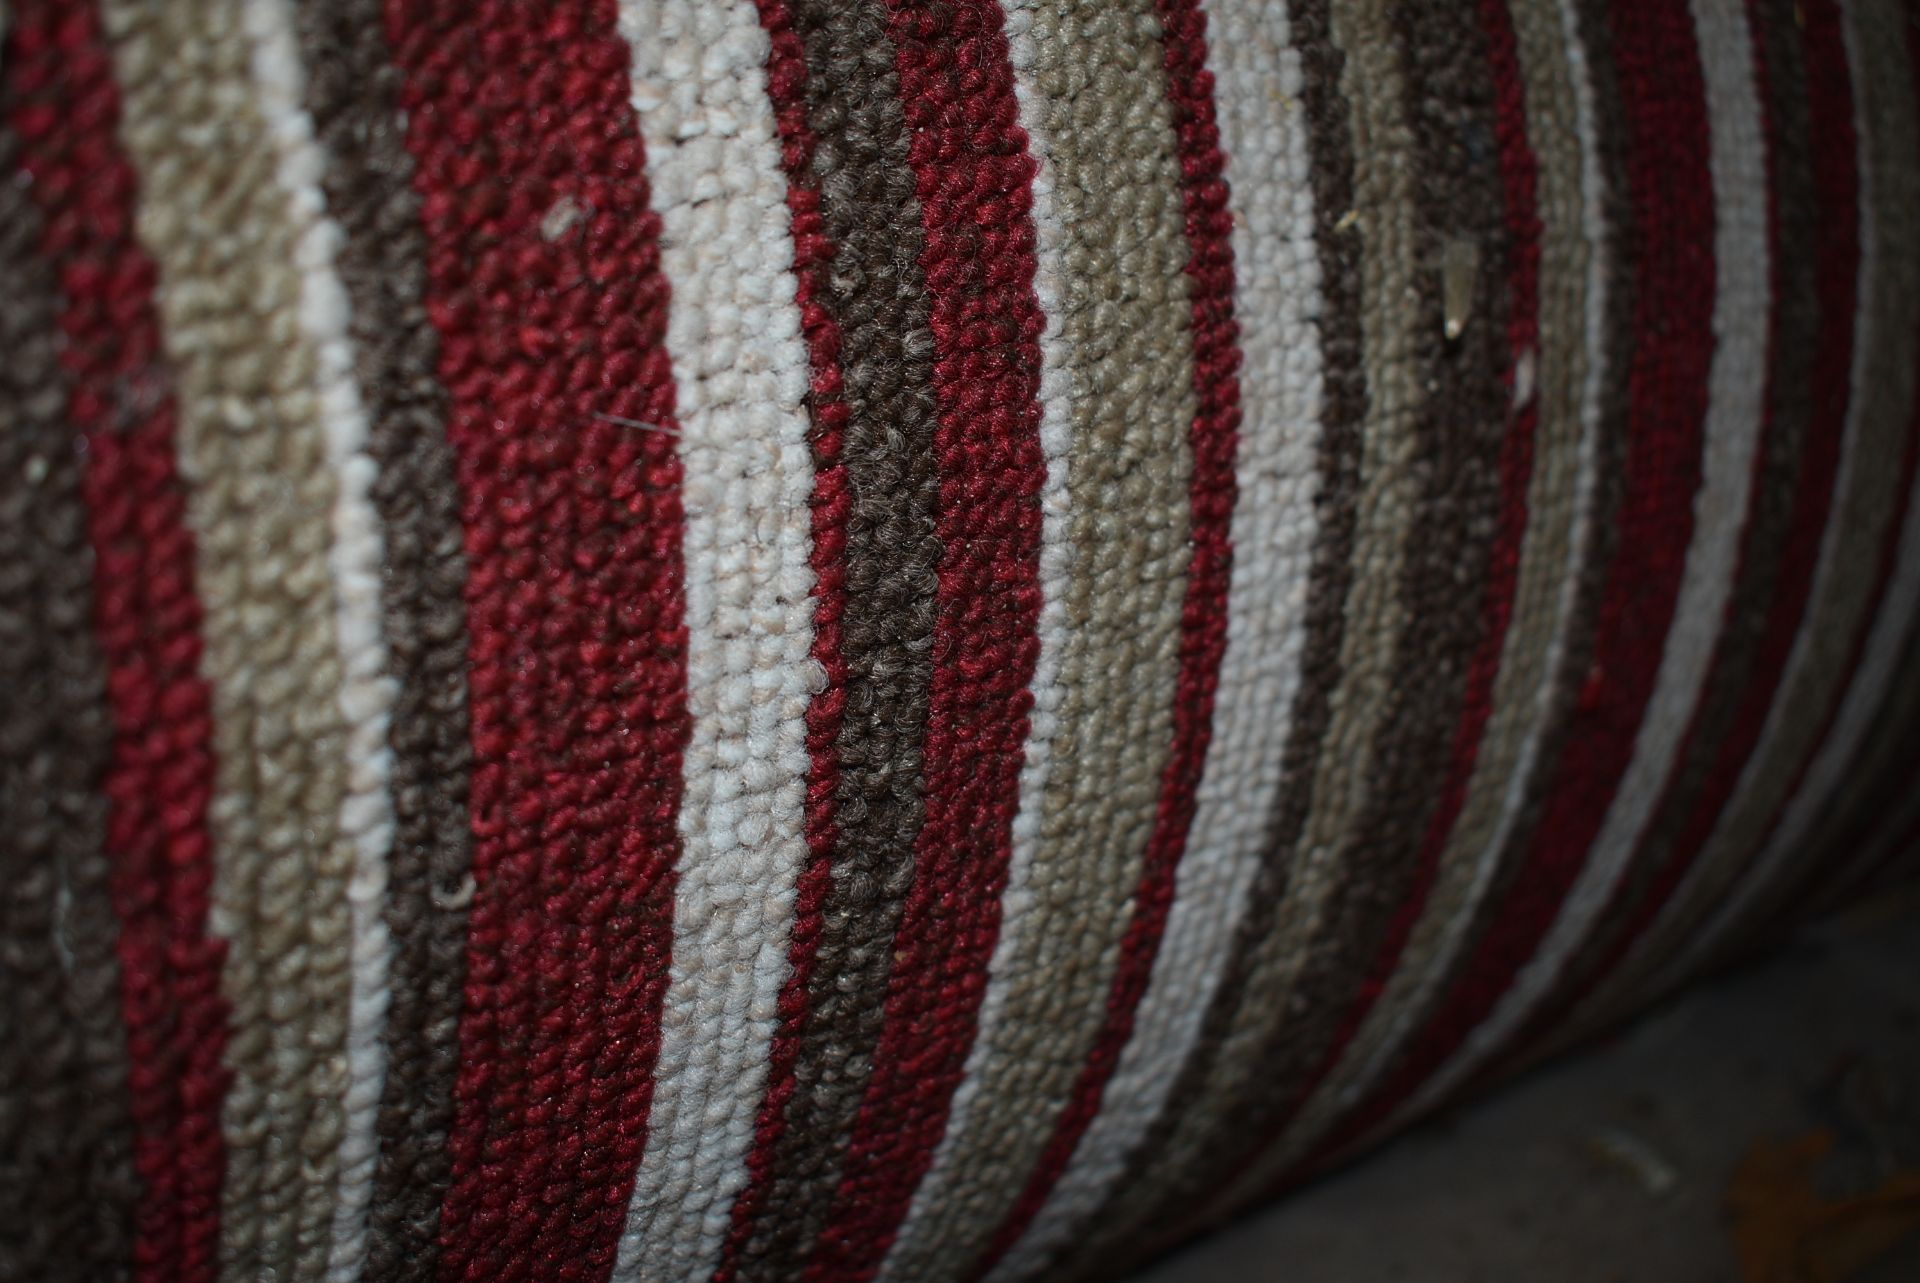 4m wide Roll of Red, Green & Beige Stripped Carpet